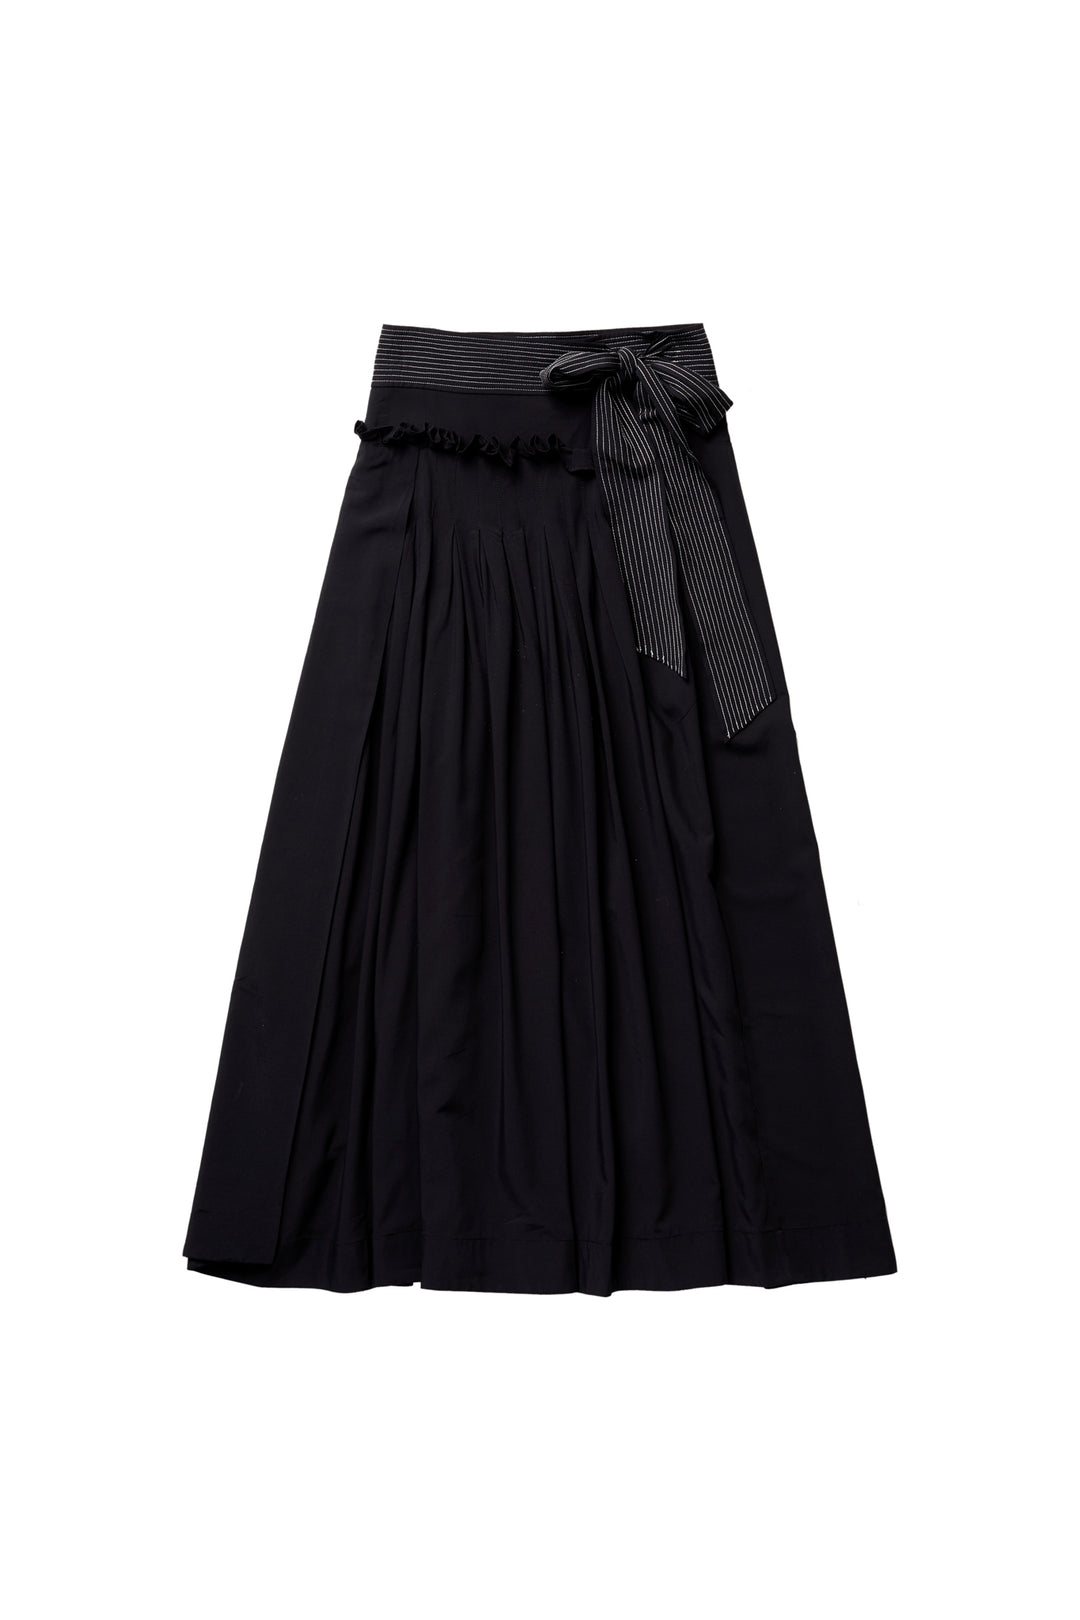 Elle Oh Elle Black Nathal with Stitching Skirt